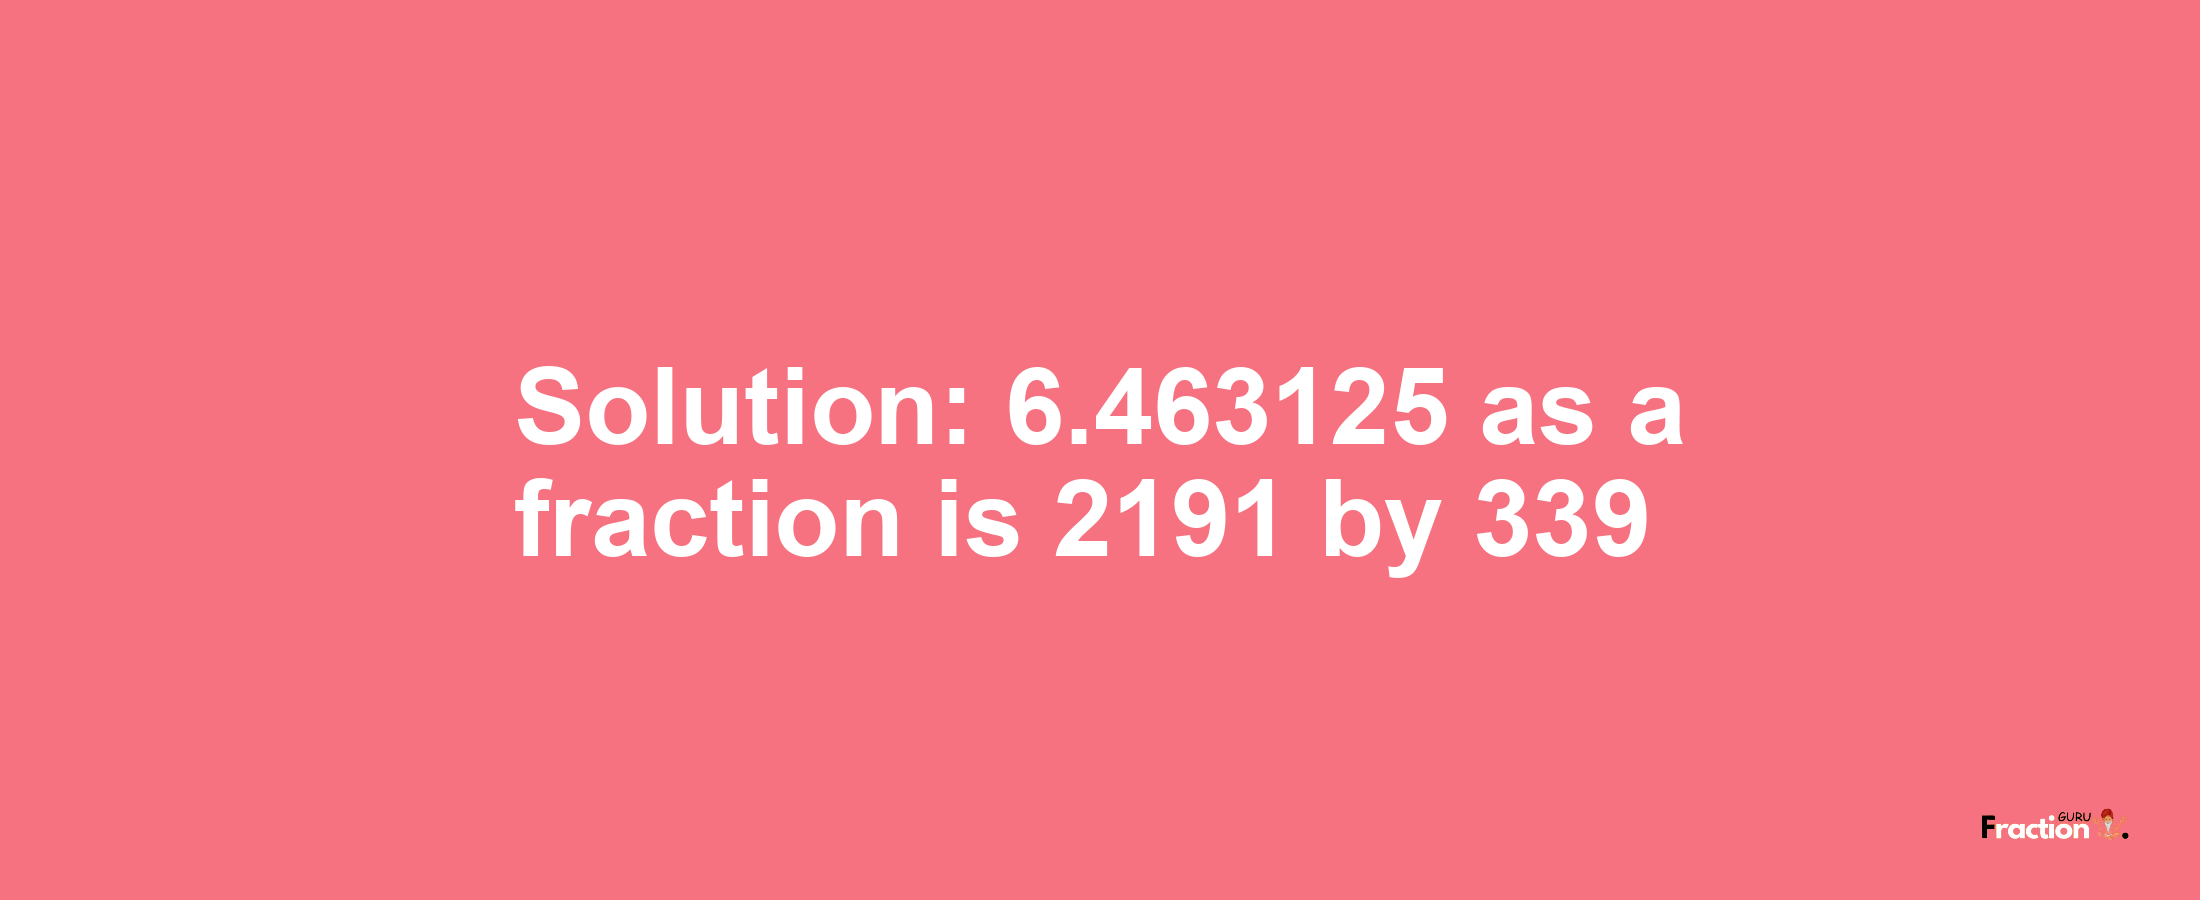 Solution:6.463125 as a fraction is 2191/339